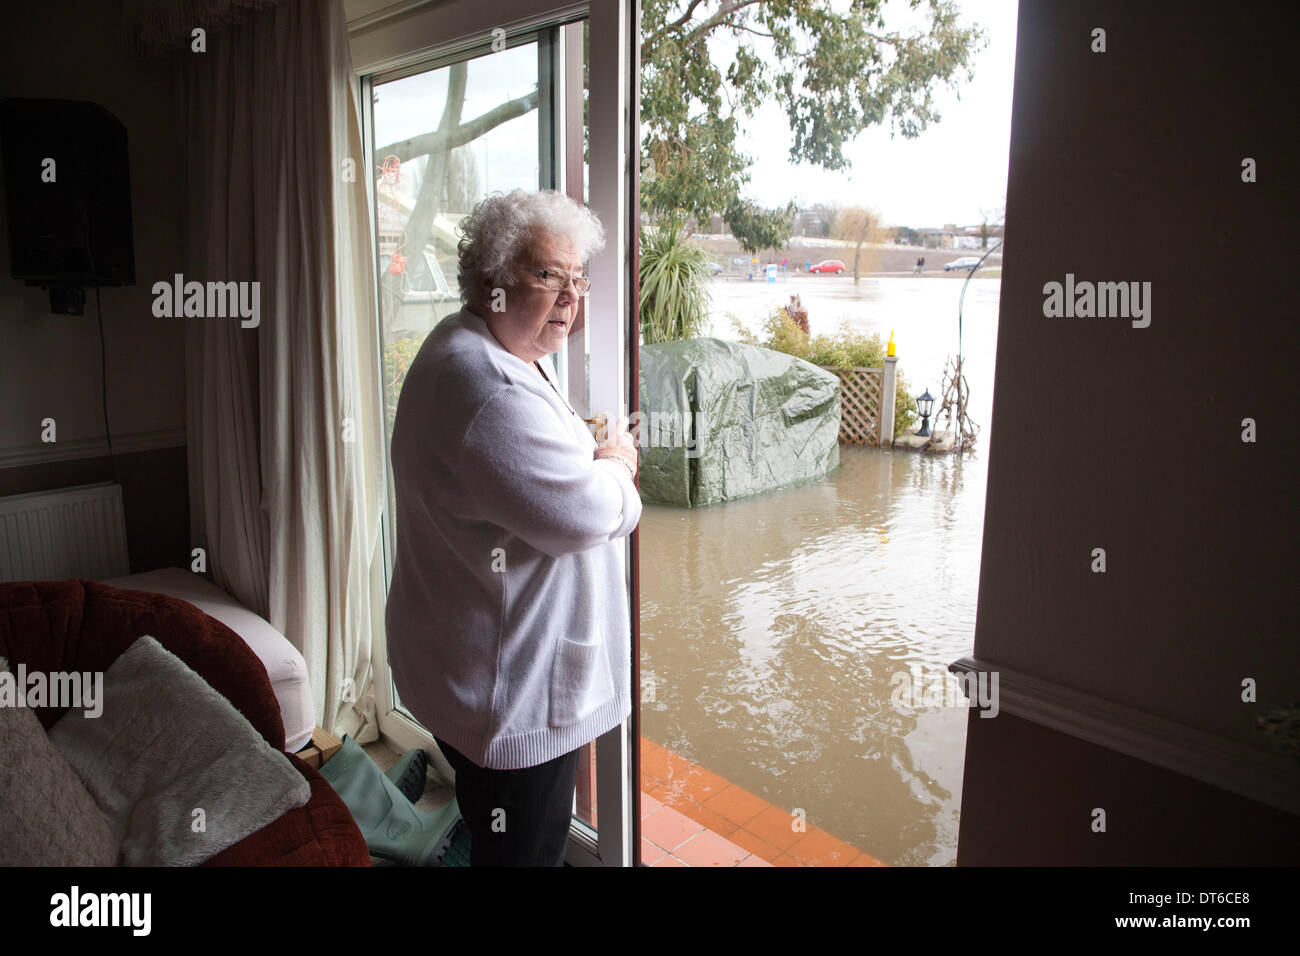 Shepperton, Greater London, UK. 9th Feb, 2014.  Margaret Yates looks out onto the river banks which have broken into the flooded streets in the town of Shepperton, located in the borough of Spelthorne, Greater London. Credit:  Jeff Gilbert/Alamy Live News Stock Photo